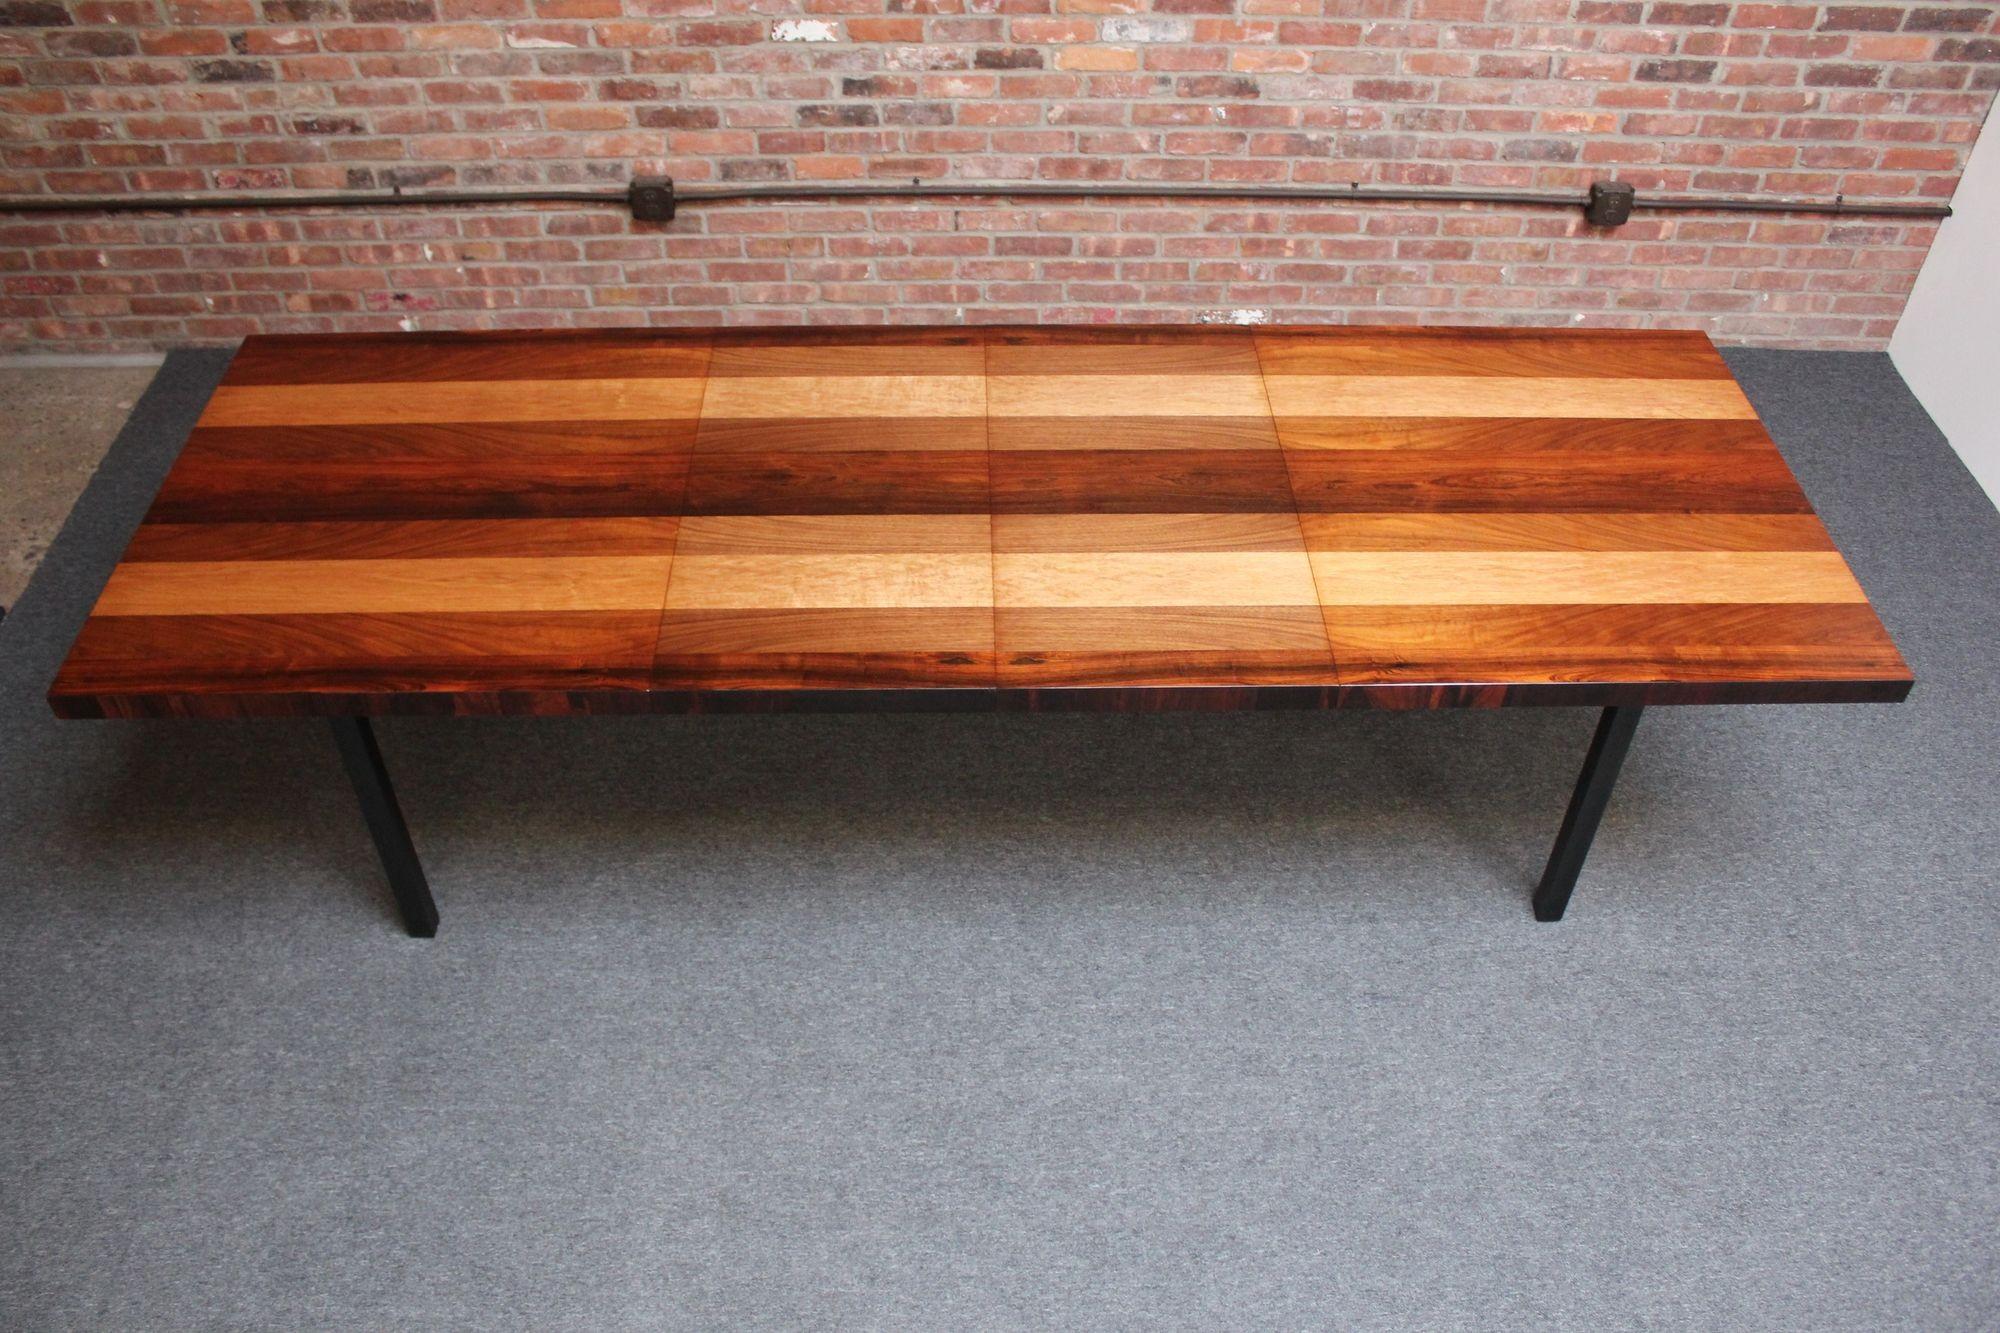 Mixed-woods dining table designed by Milo Baughman for Directional's 